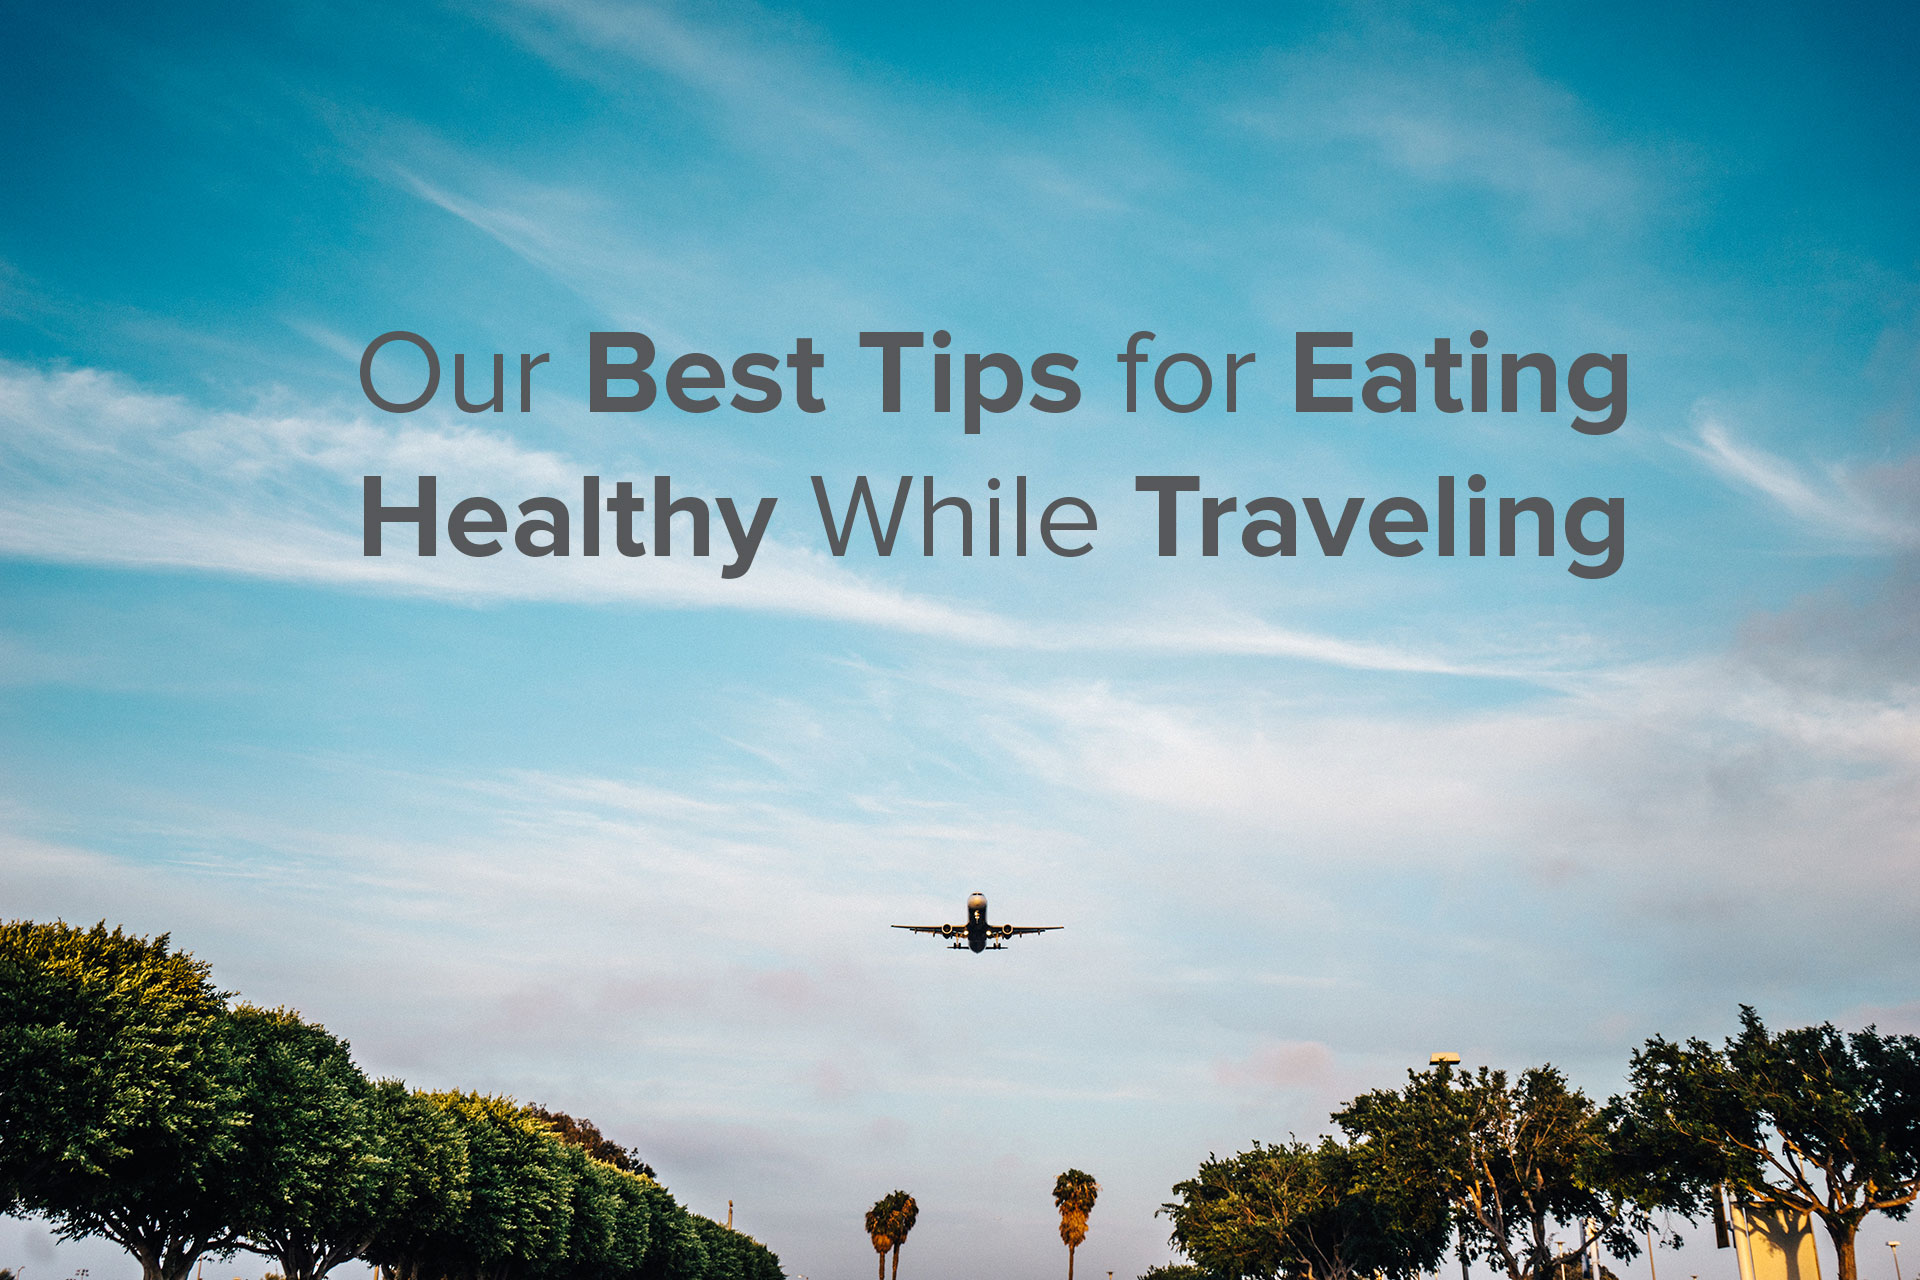 Our Best Tips for Eating Healthy While Traveling